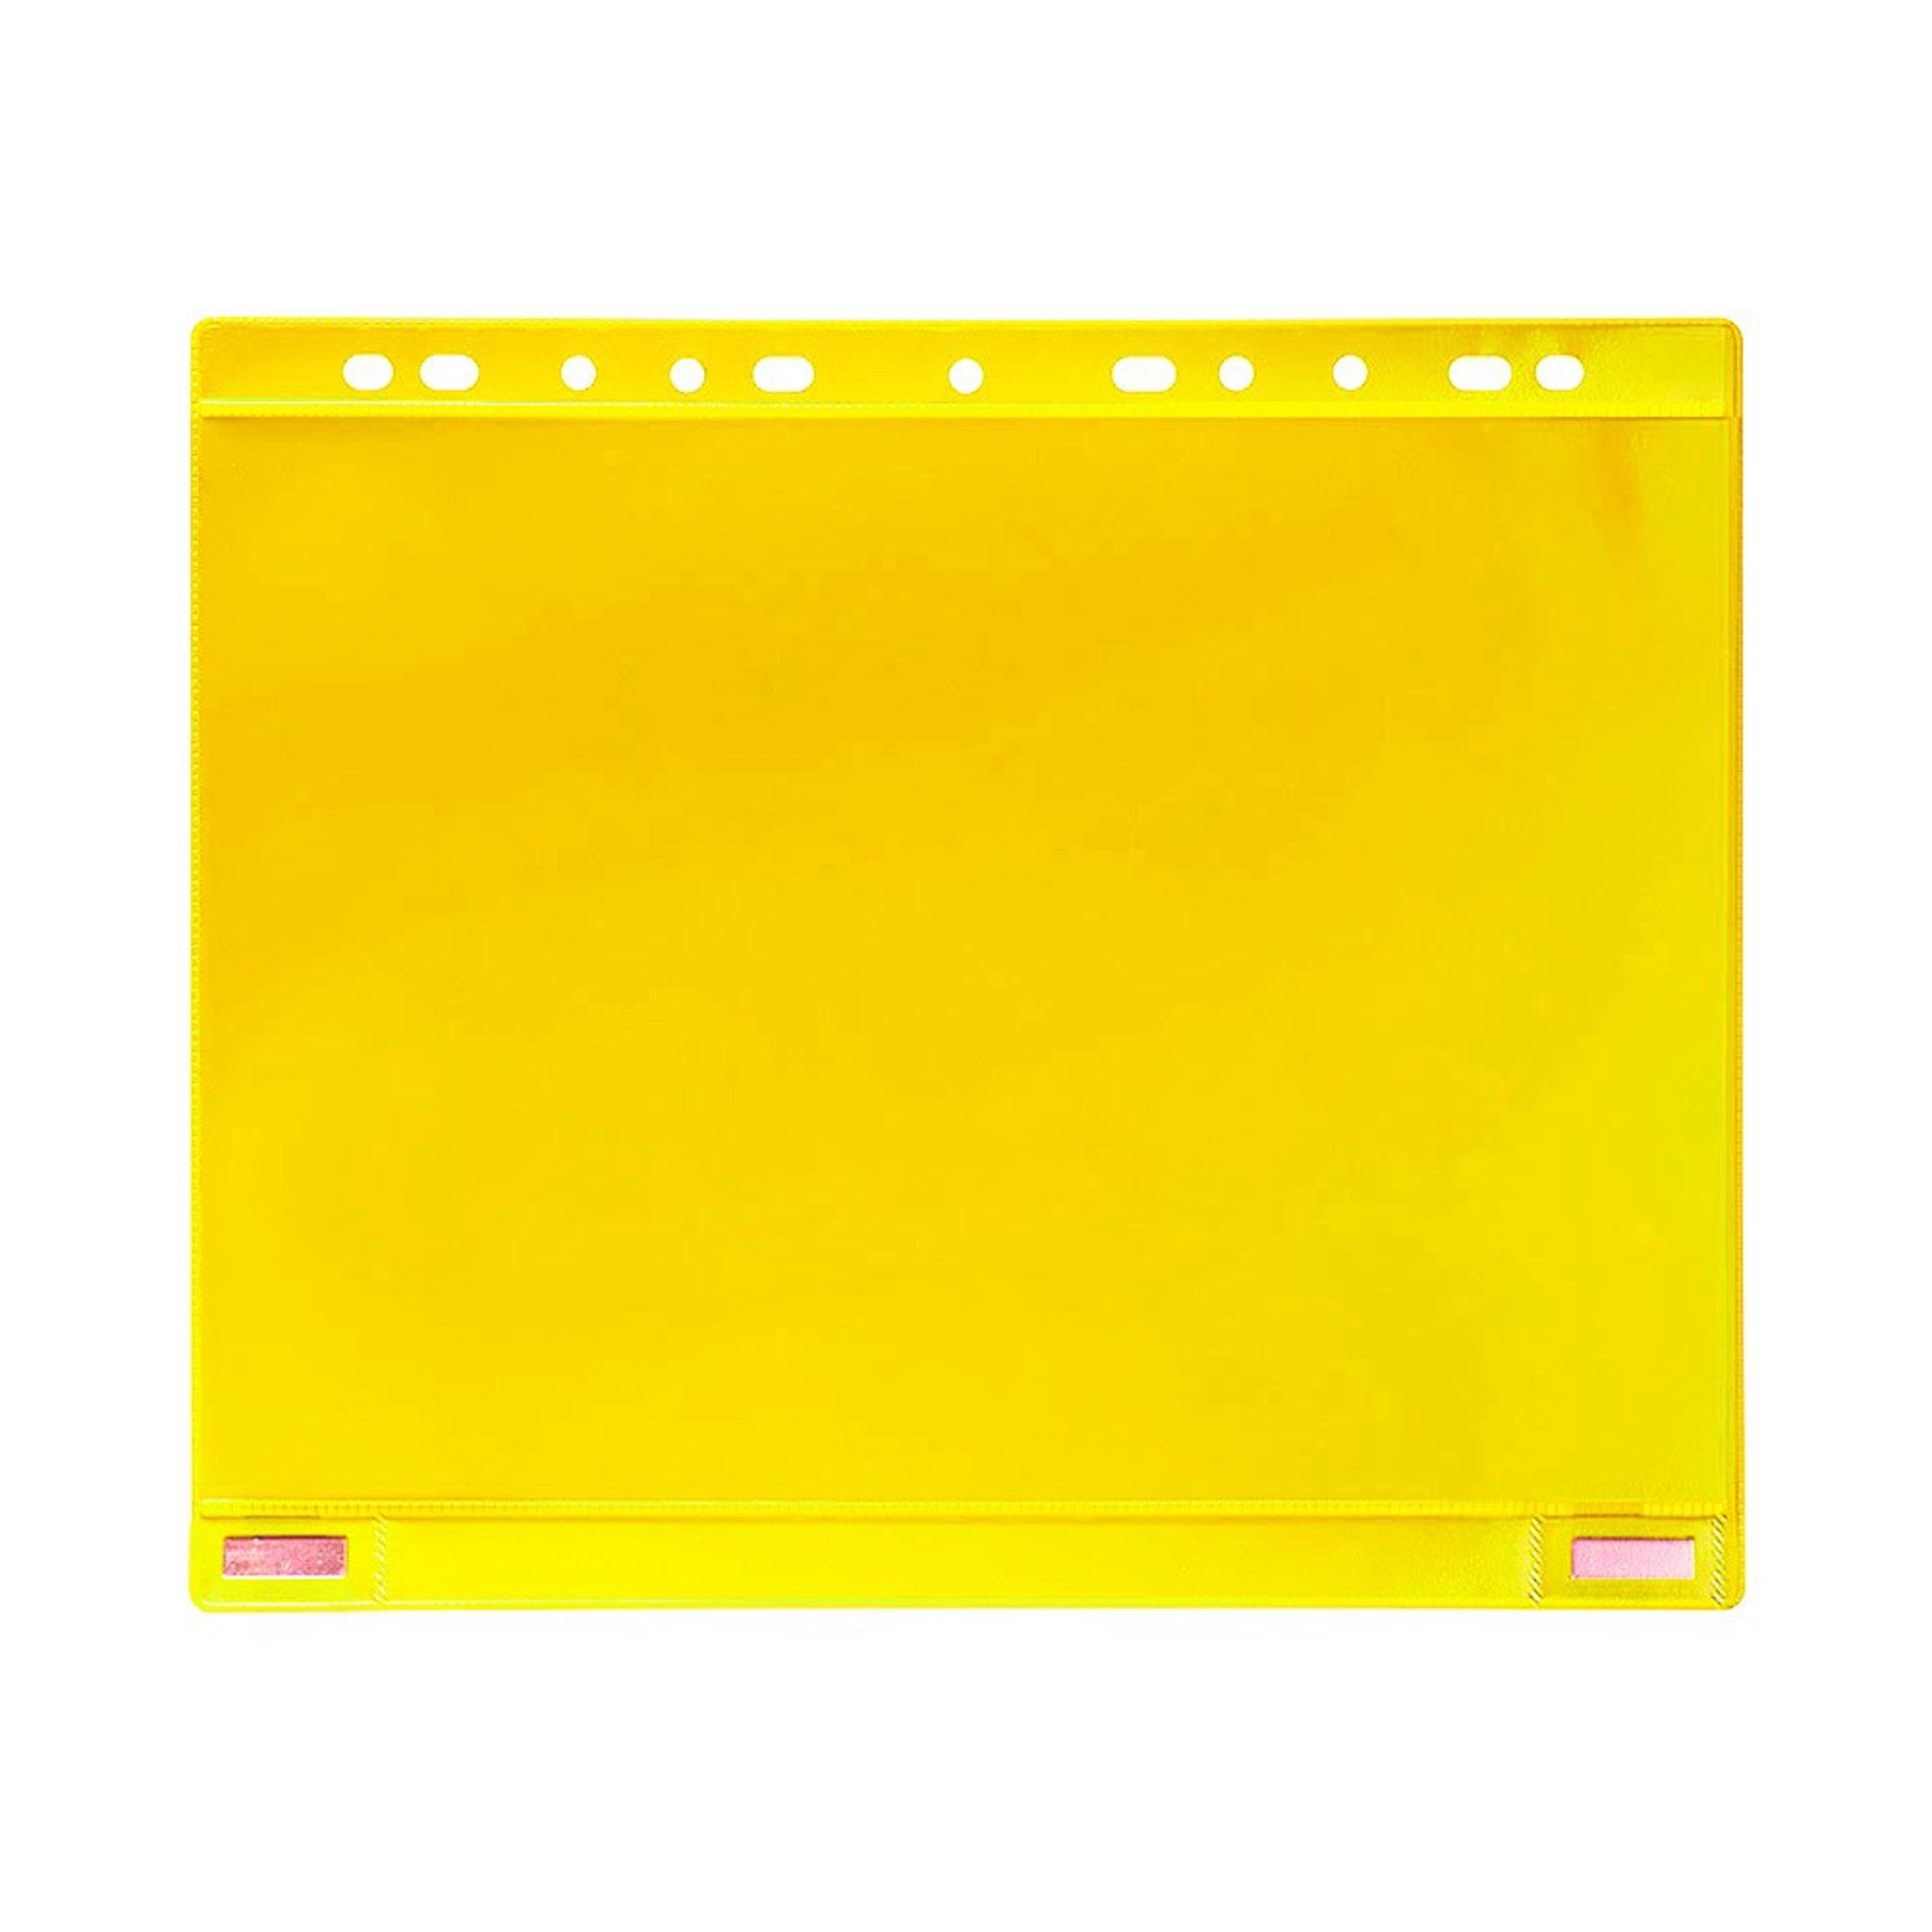 tarifold-conf-5-buste-forate-supporti-magnetici-anelli-f-to-a4-giallo